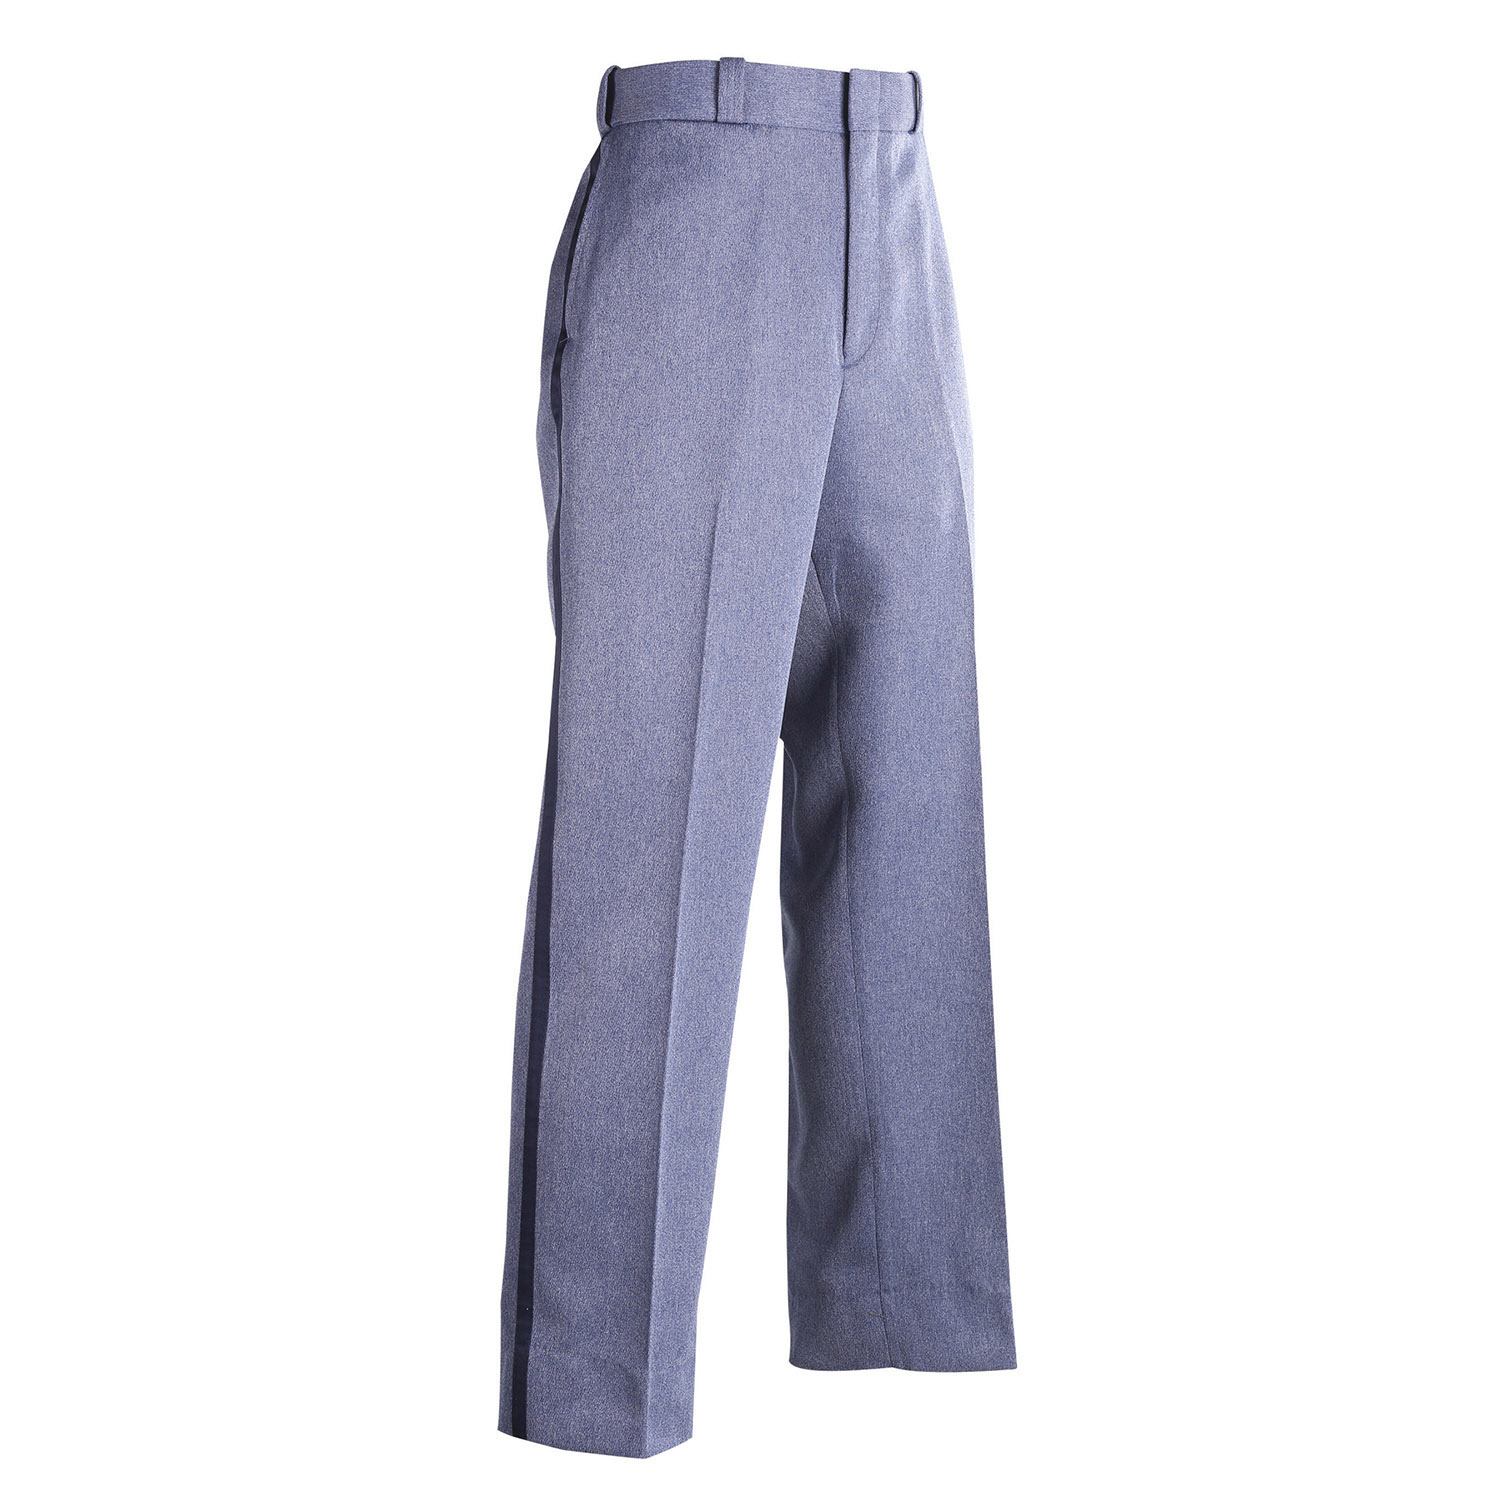 Memo Relaxed Trousers Men, Men's Fashion, Bottoms, Trousers on Carousell-saigonsouth.com.vn